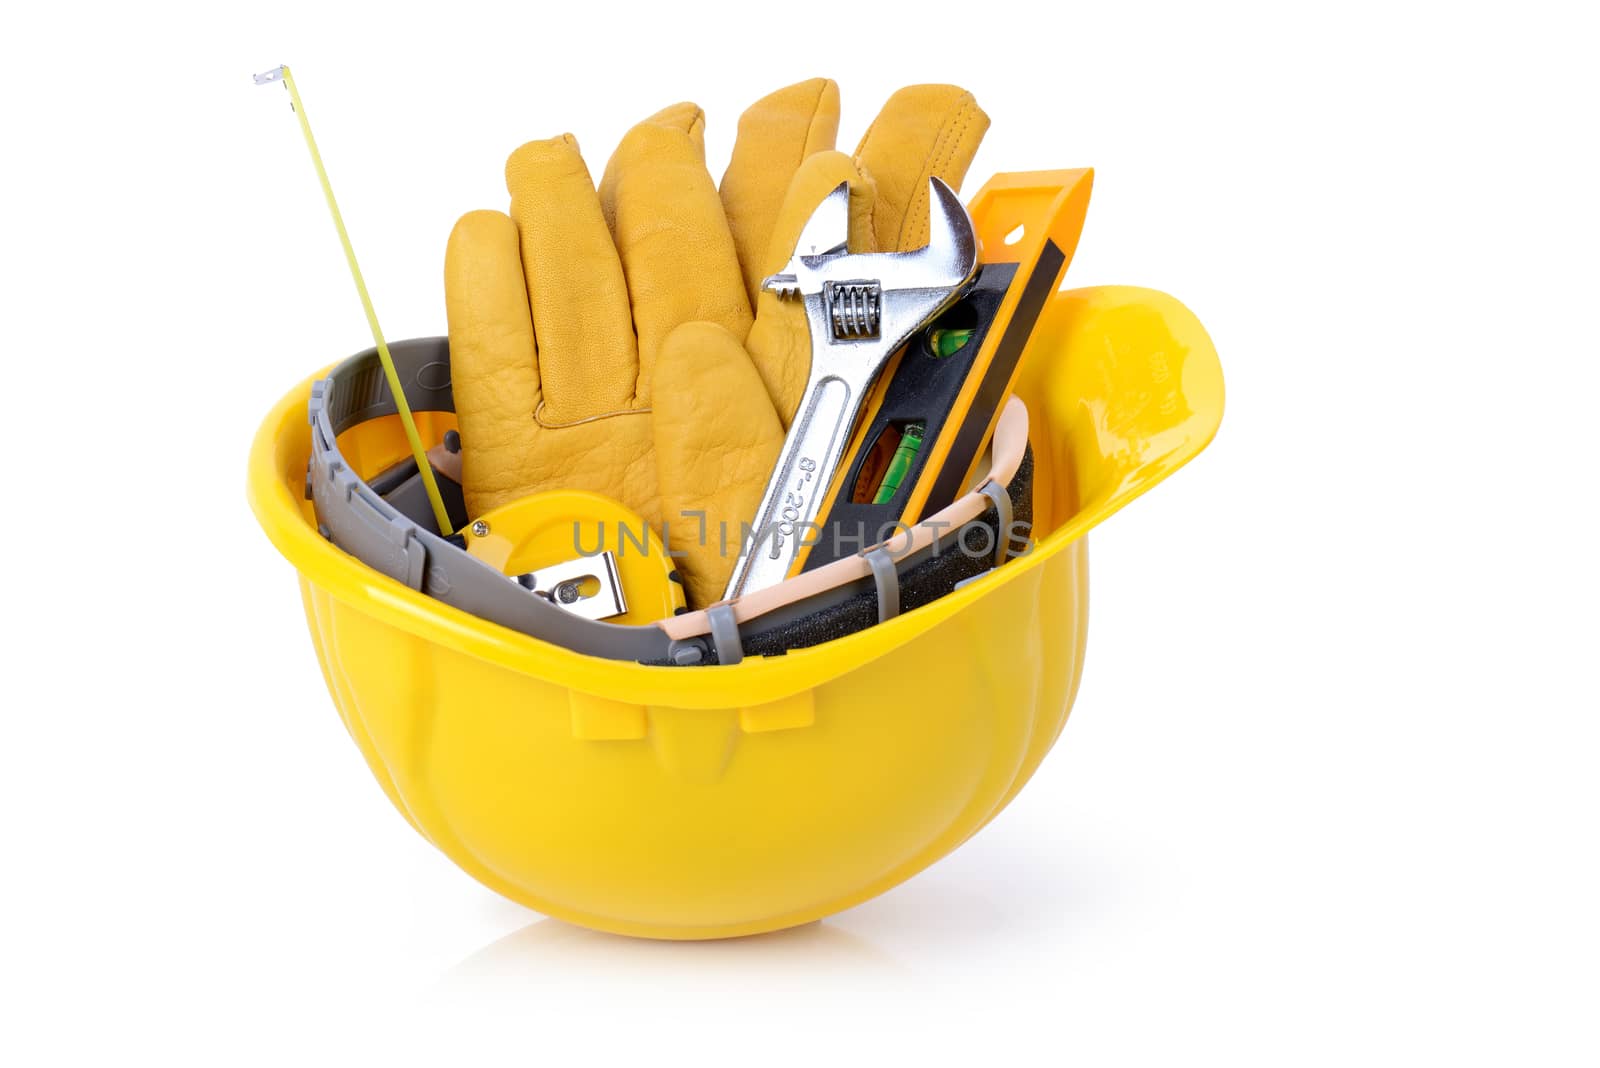 construction tools by hyrons